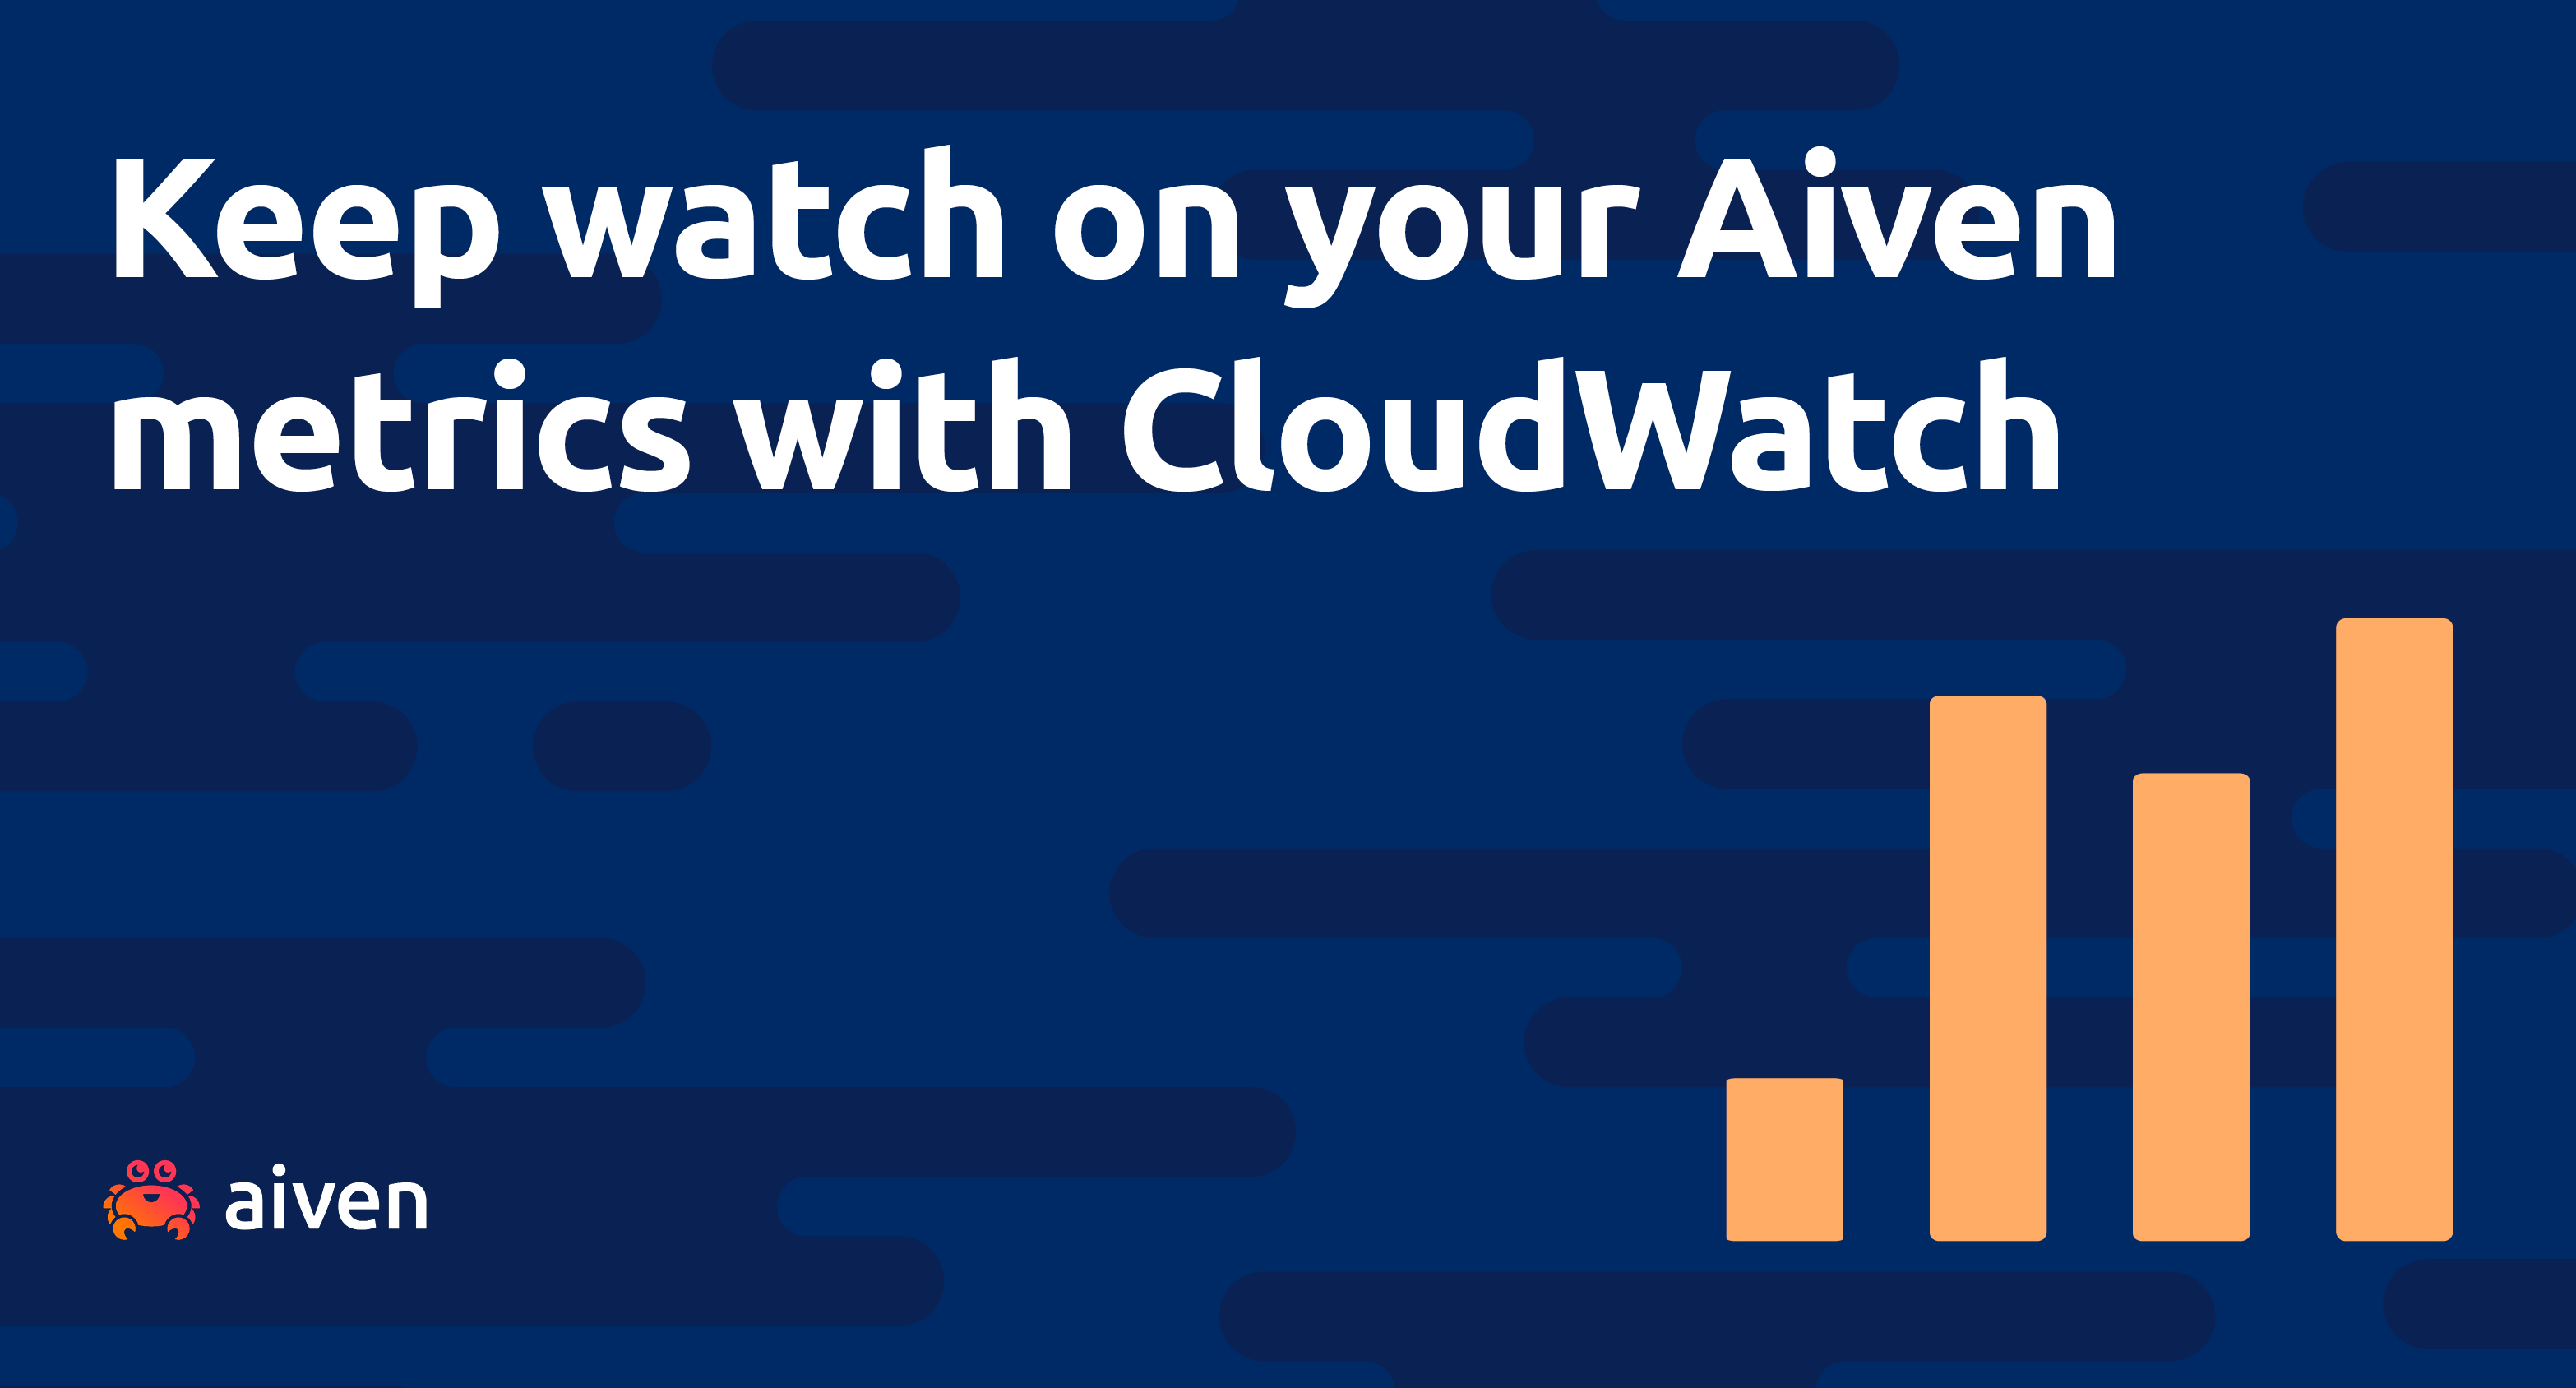 "I see you" - Watch your Aiven metrics with CloudWatch illustration